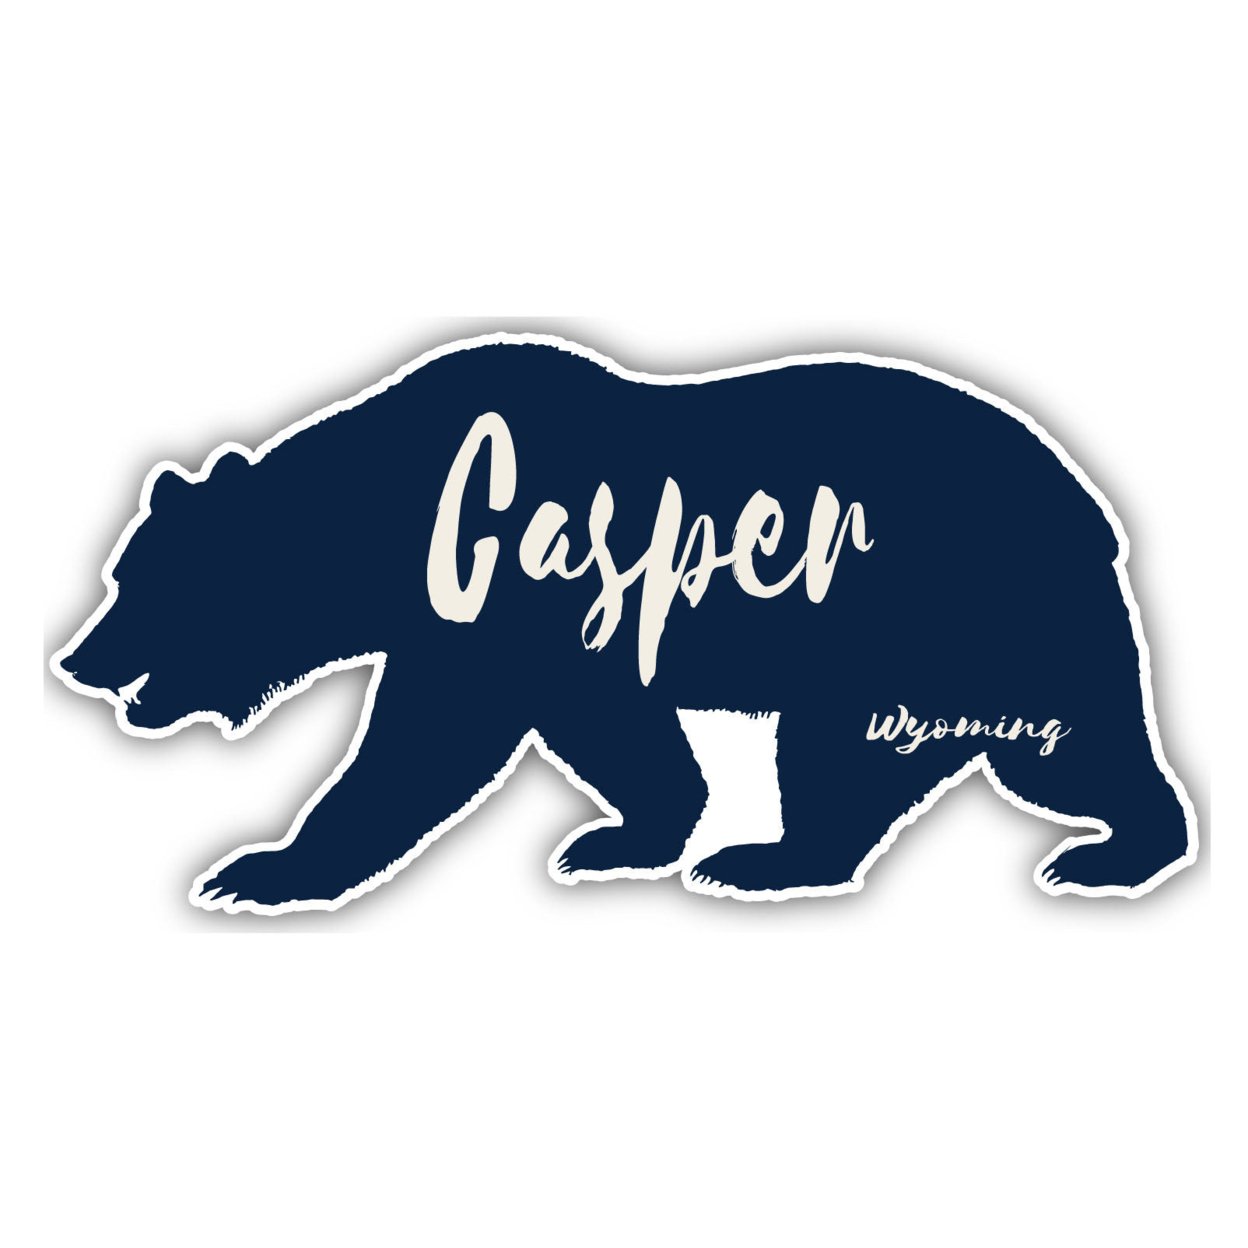 Casper Wyoming Souvenir Decorative Stickers (Choose Theme And Size) - 4-Pack, 2-Inch, Tent